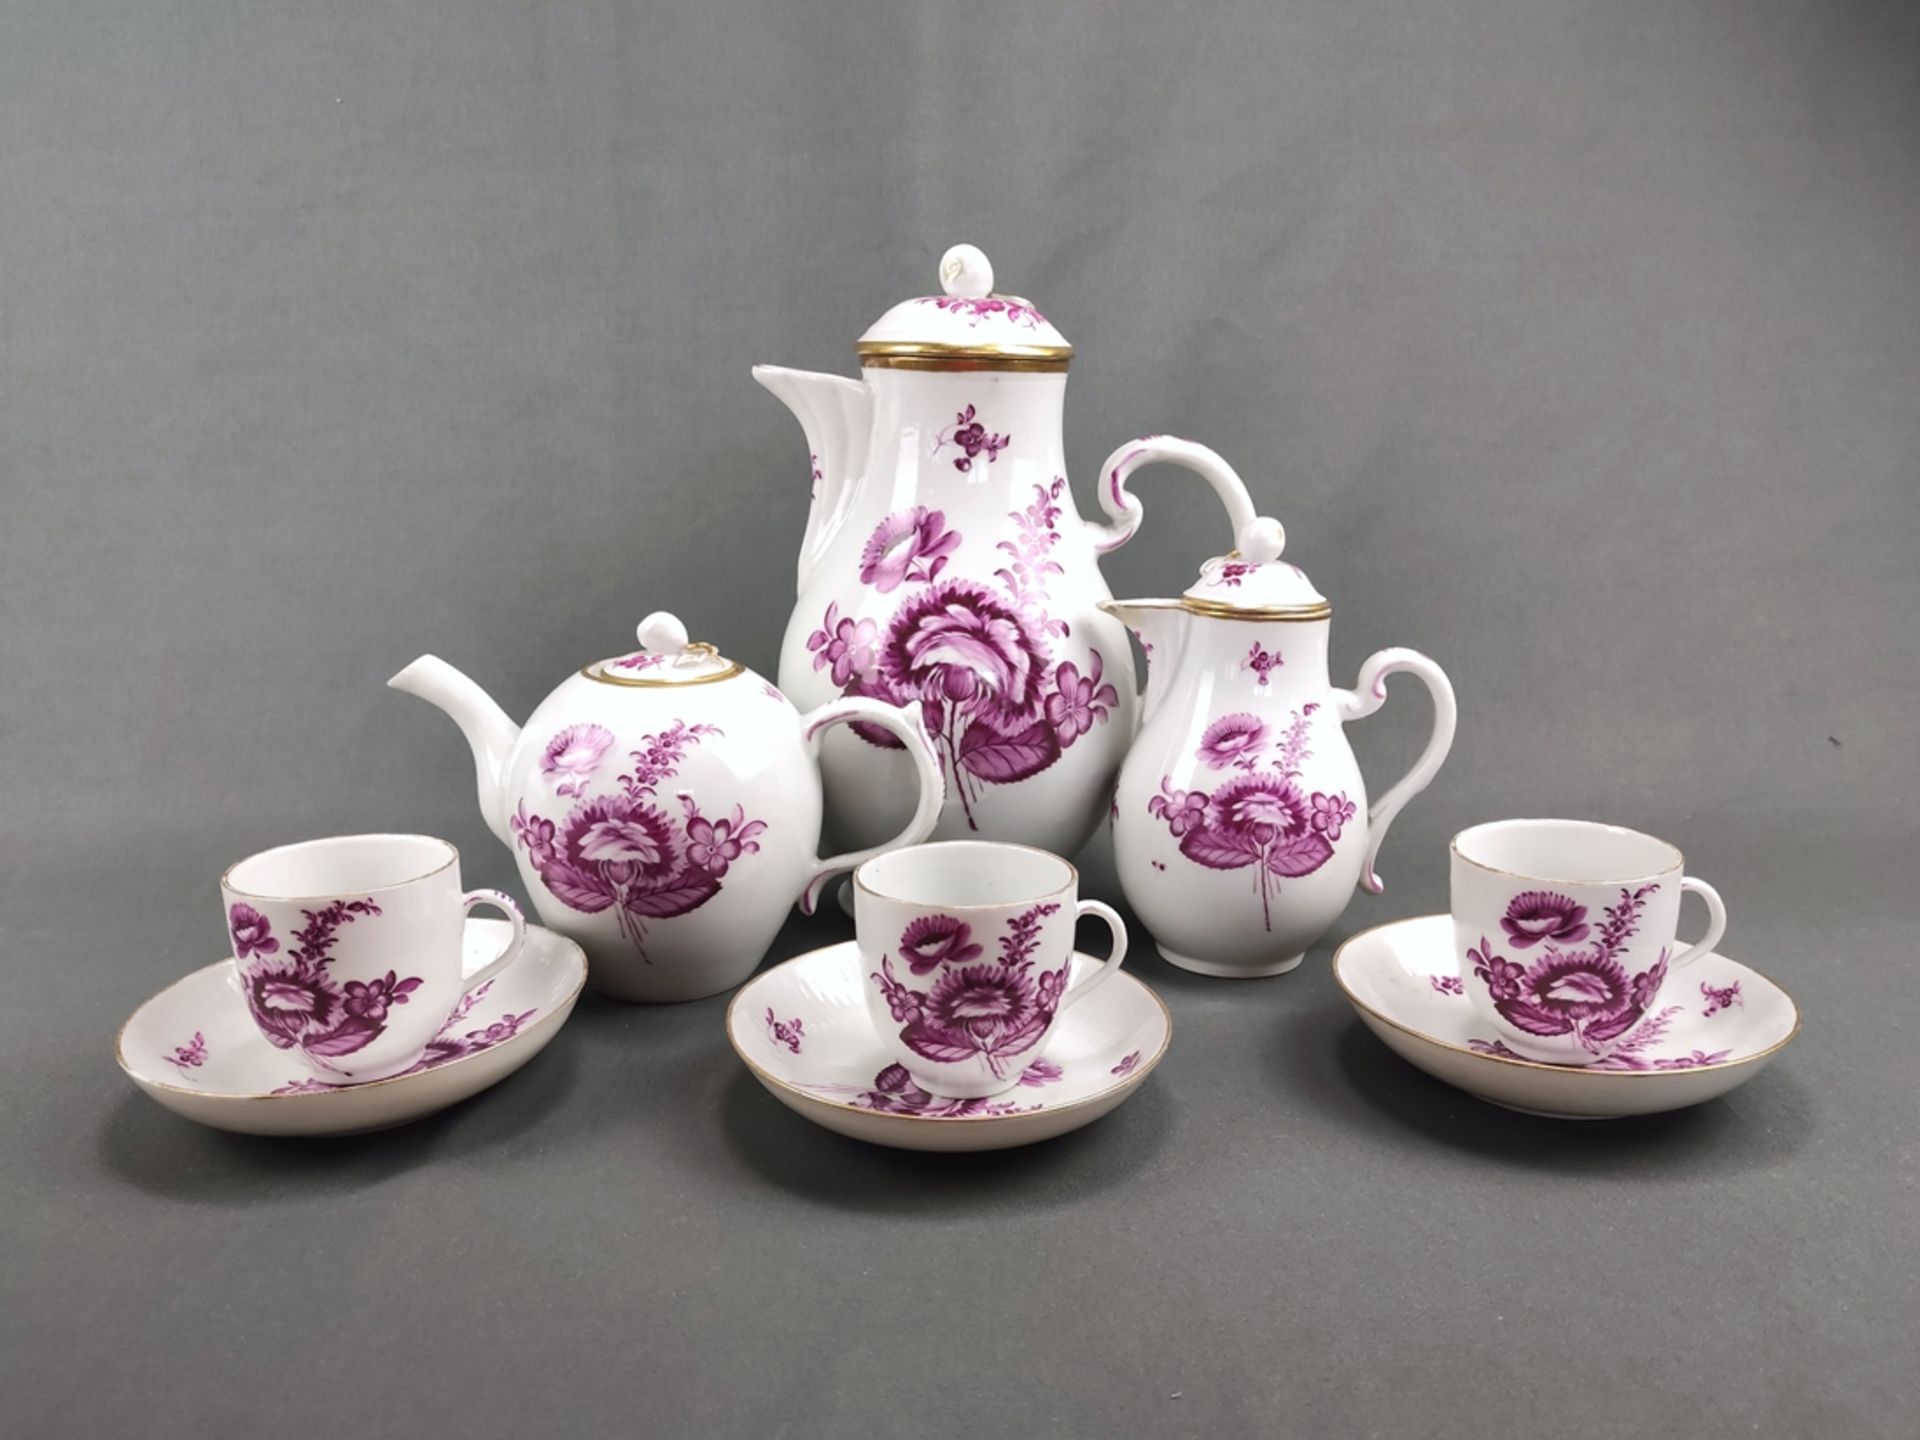 Three teapots and three mocha cups with saucers, Volkstedt Rudolstadt, around 1900, purple floral p